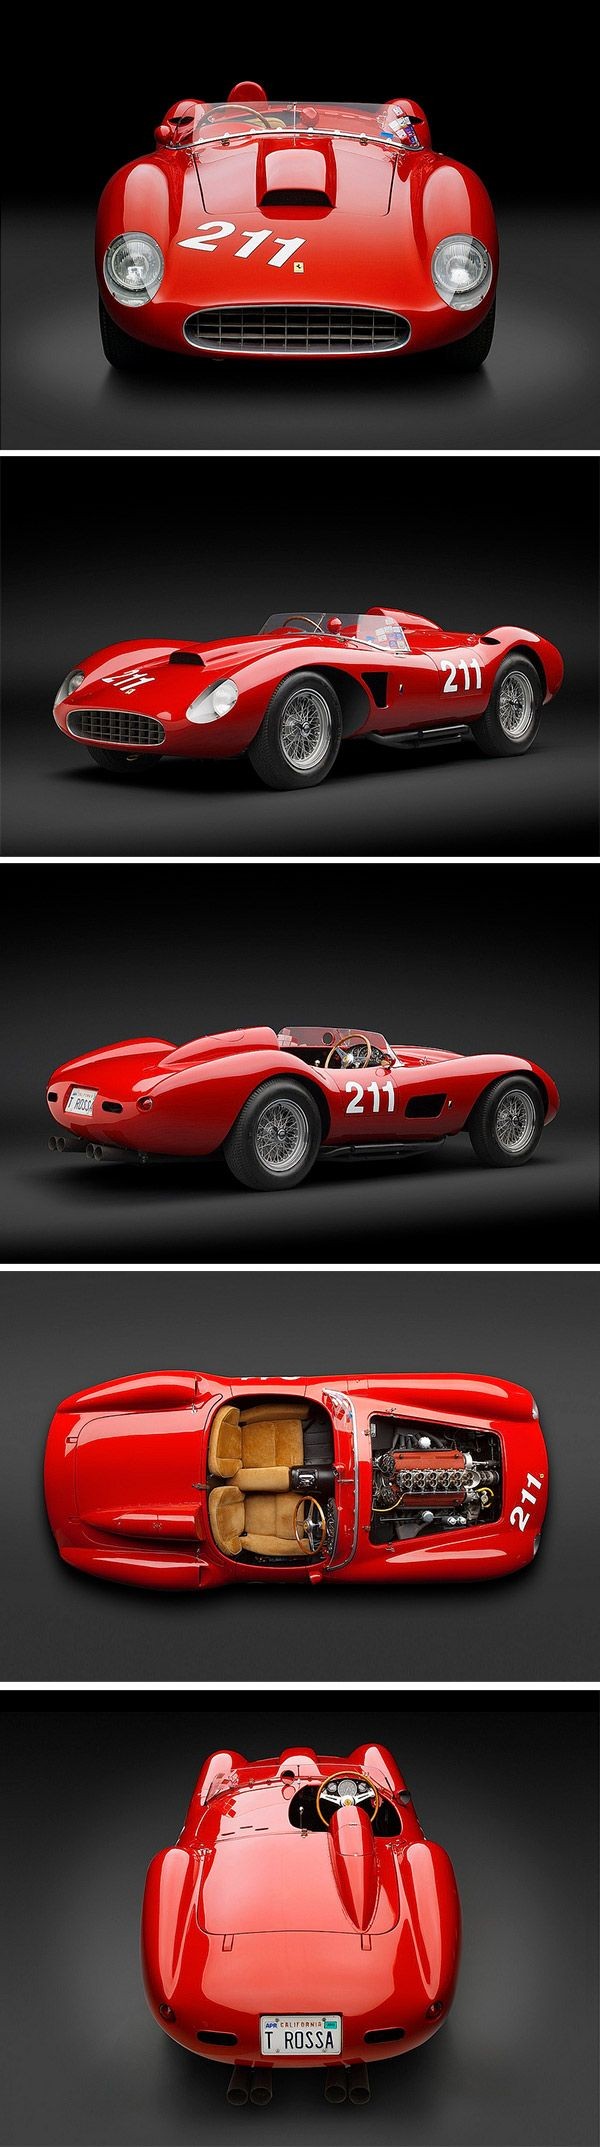 How incredibly gorgeous is this car? Ferrari 625 T...